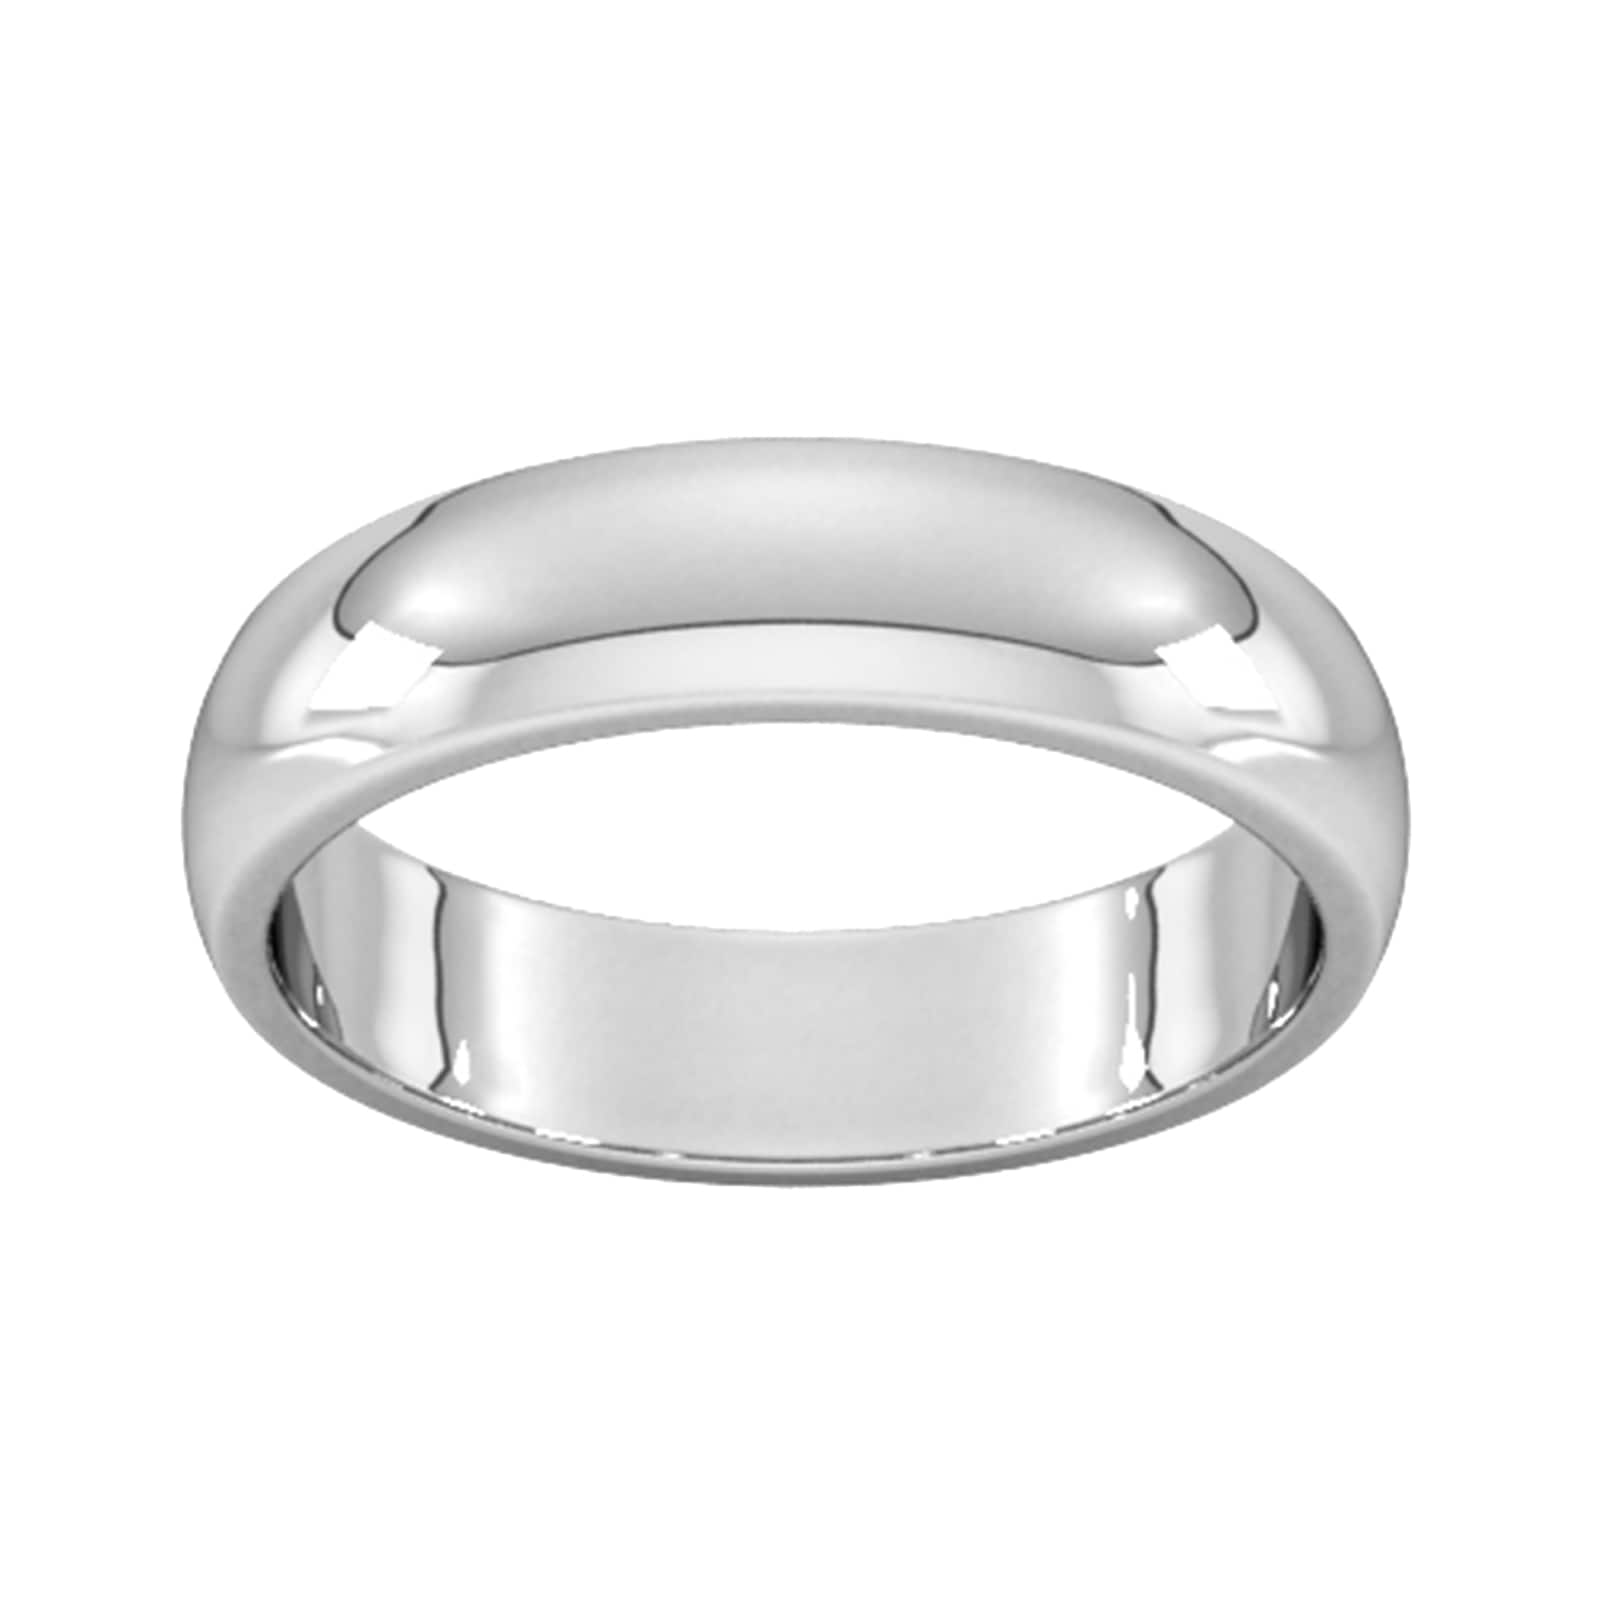 5mm D Shape Heavy Wedding Ring In 9 Carat White Gold - Ring Size J